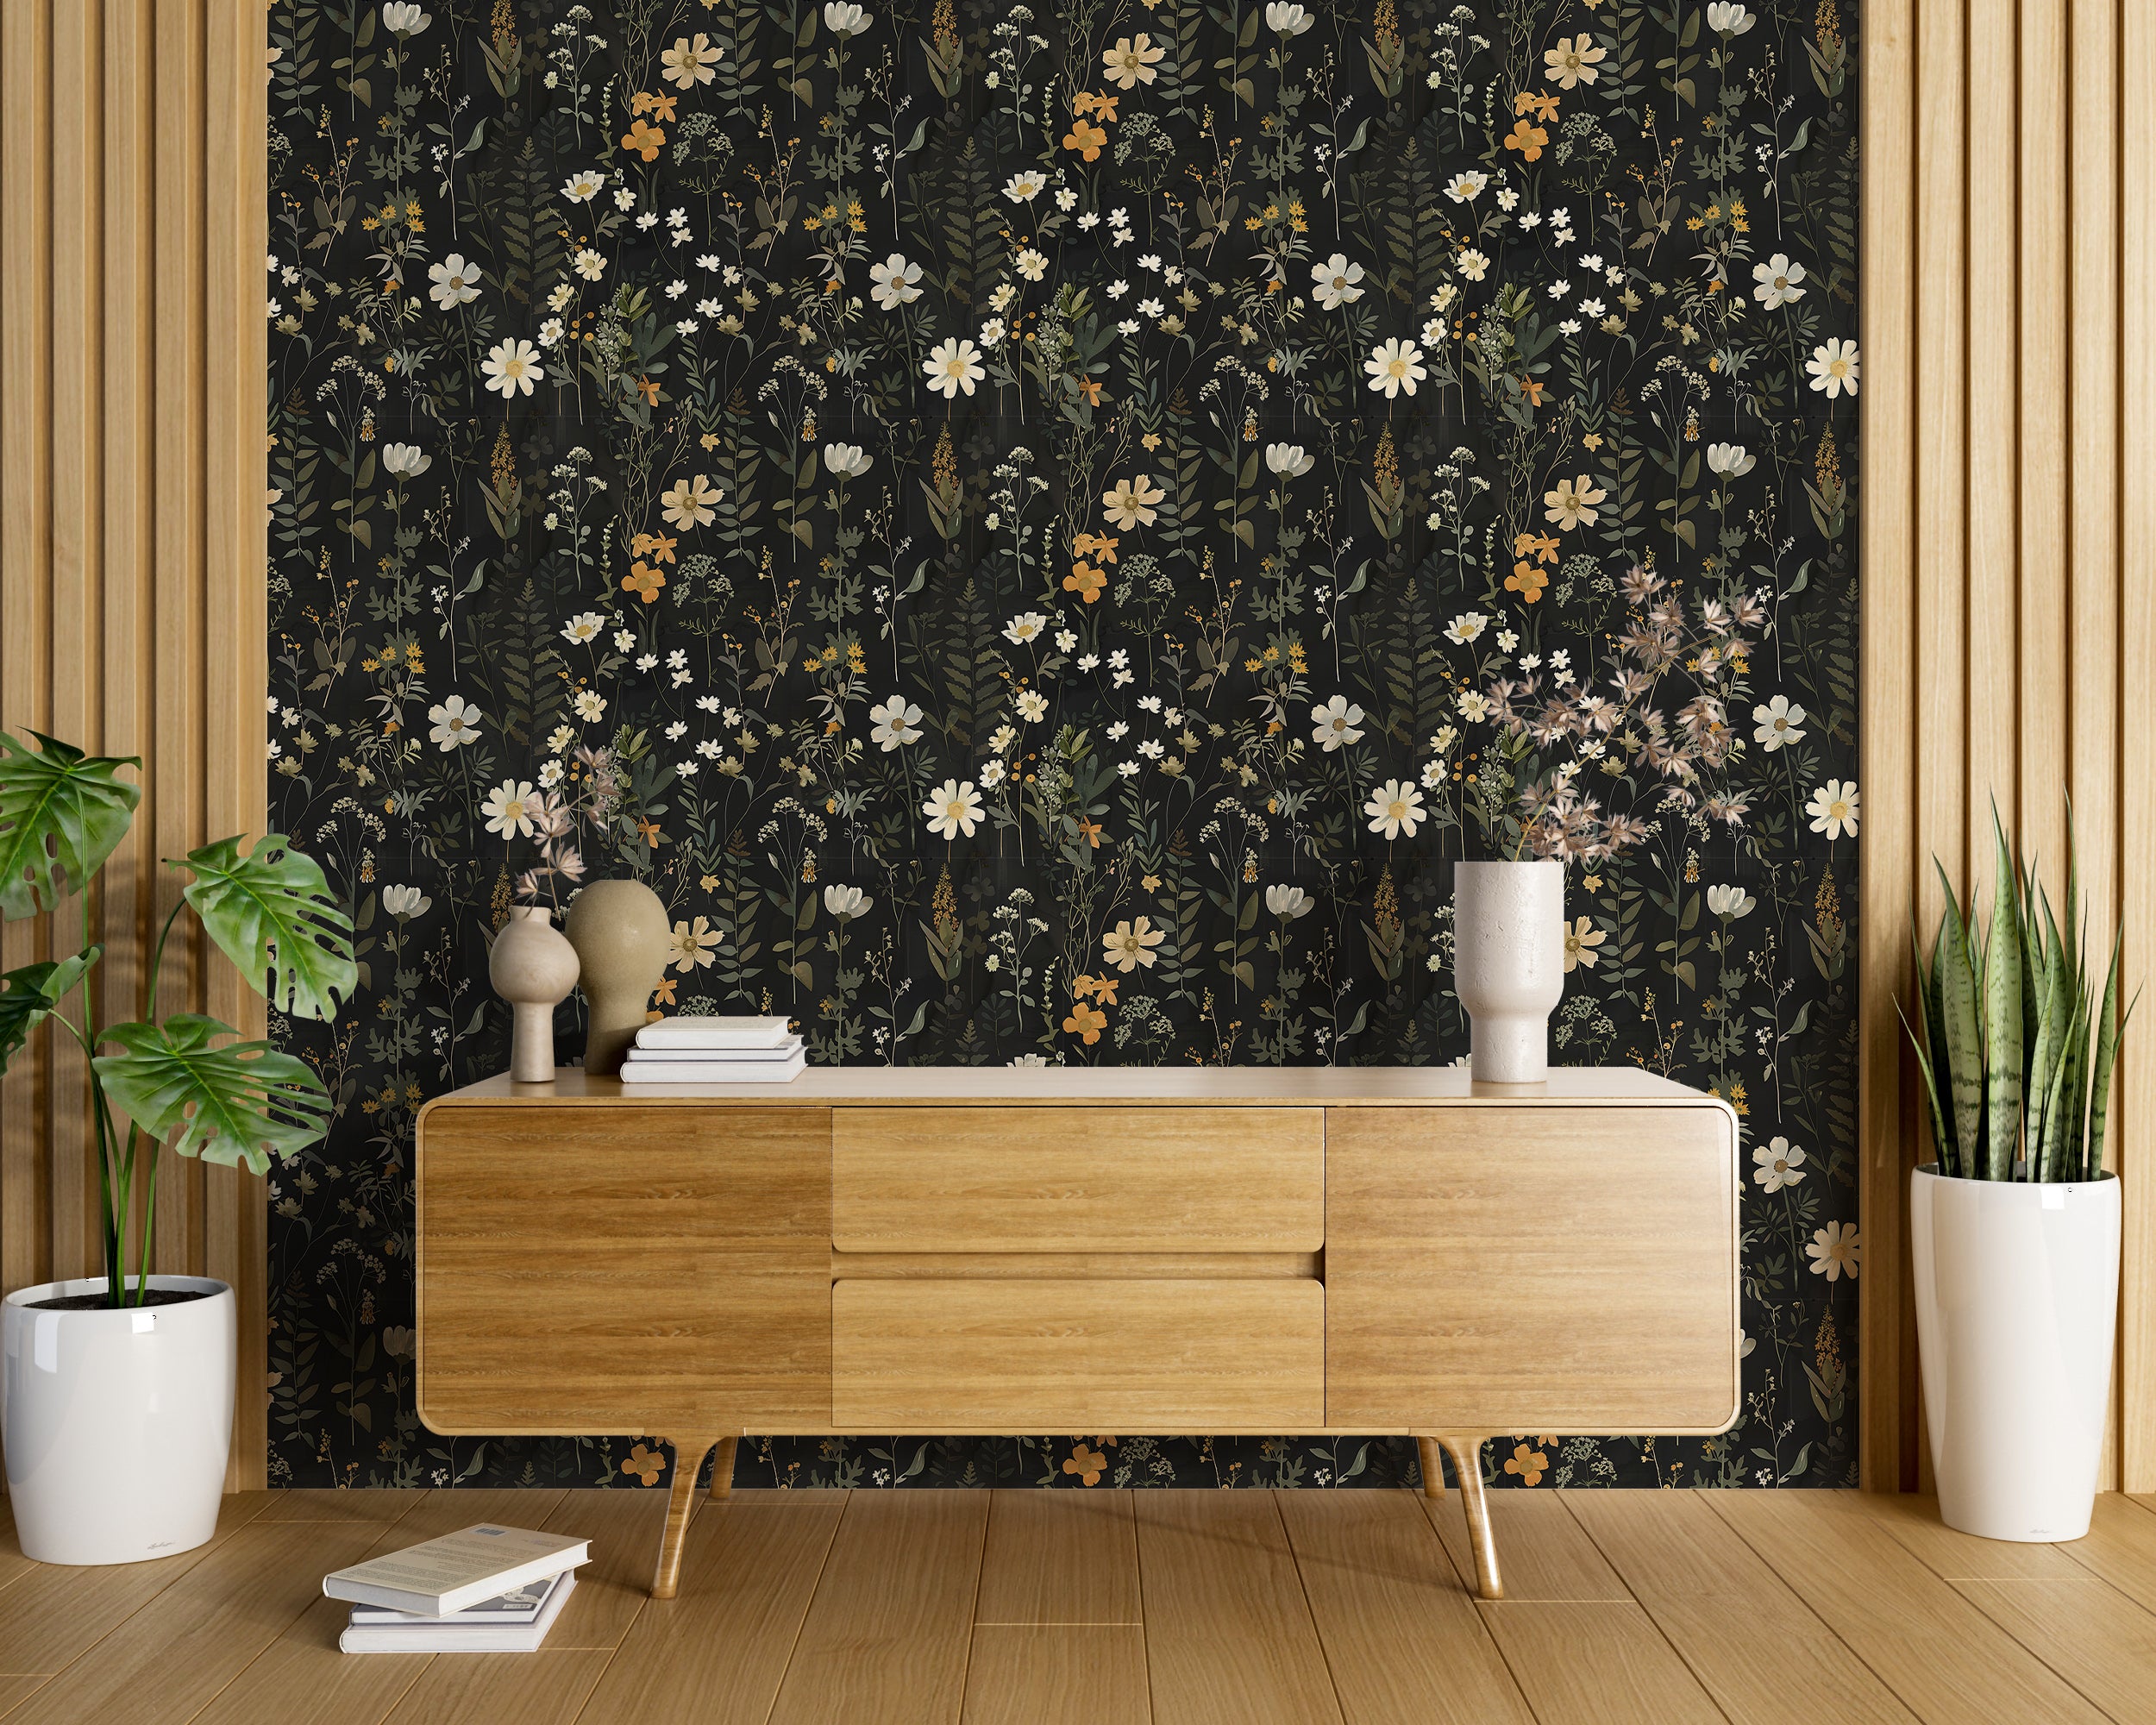 Meadow Flowers Dark Wallpaper, Fern Wall Decor, Peel and Stick Botanical, Dark Floral Decal, Removable Flower and Leaves on Black Background